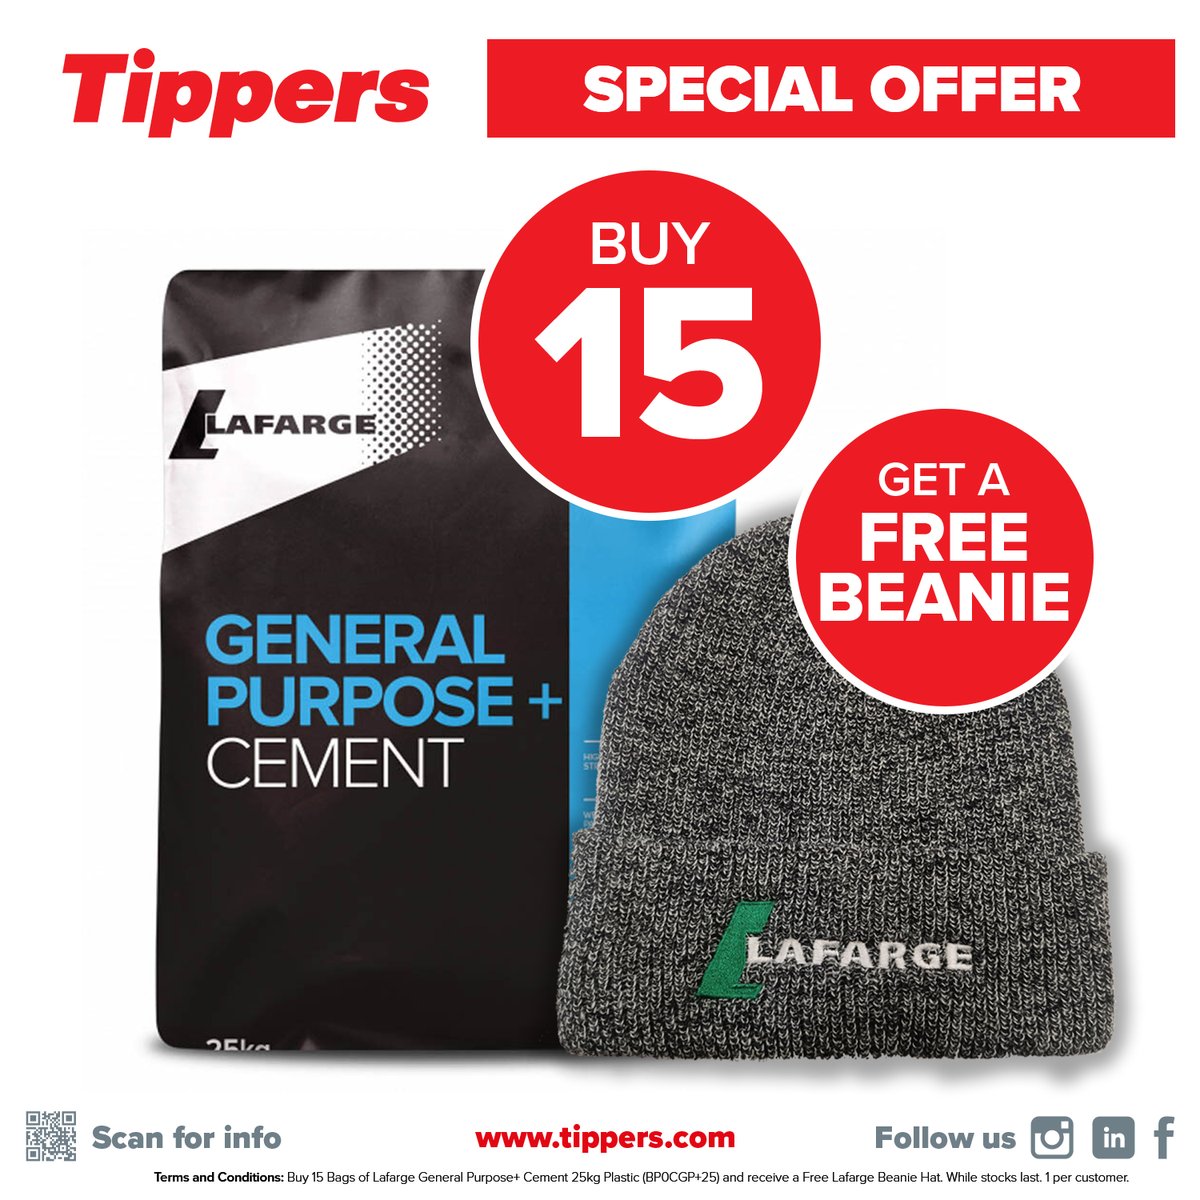 Grab yourself a Free Beanie at your Local Branch! 🎩 Buy 15 Bags of Lafarge General Purpose+ Cement 25kg (Plastic) and get a Free Lafarge Beanie! While stocks last! Buy online: tippers.com/products/lafar… Find your local branch here: tippers.com/stores.html